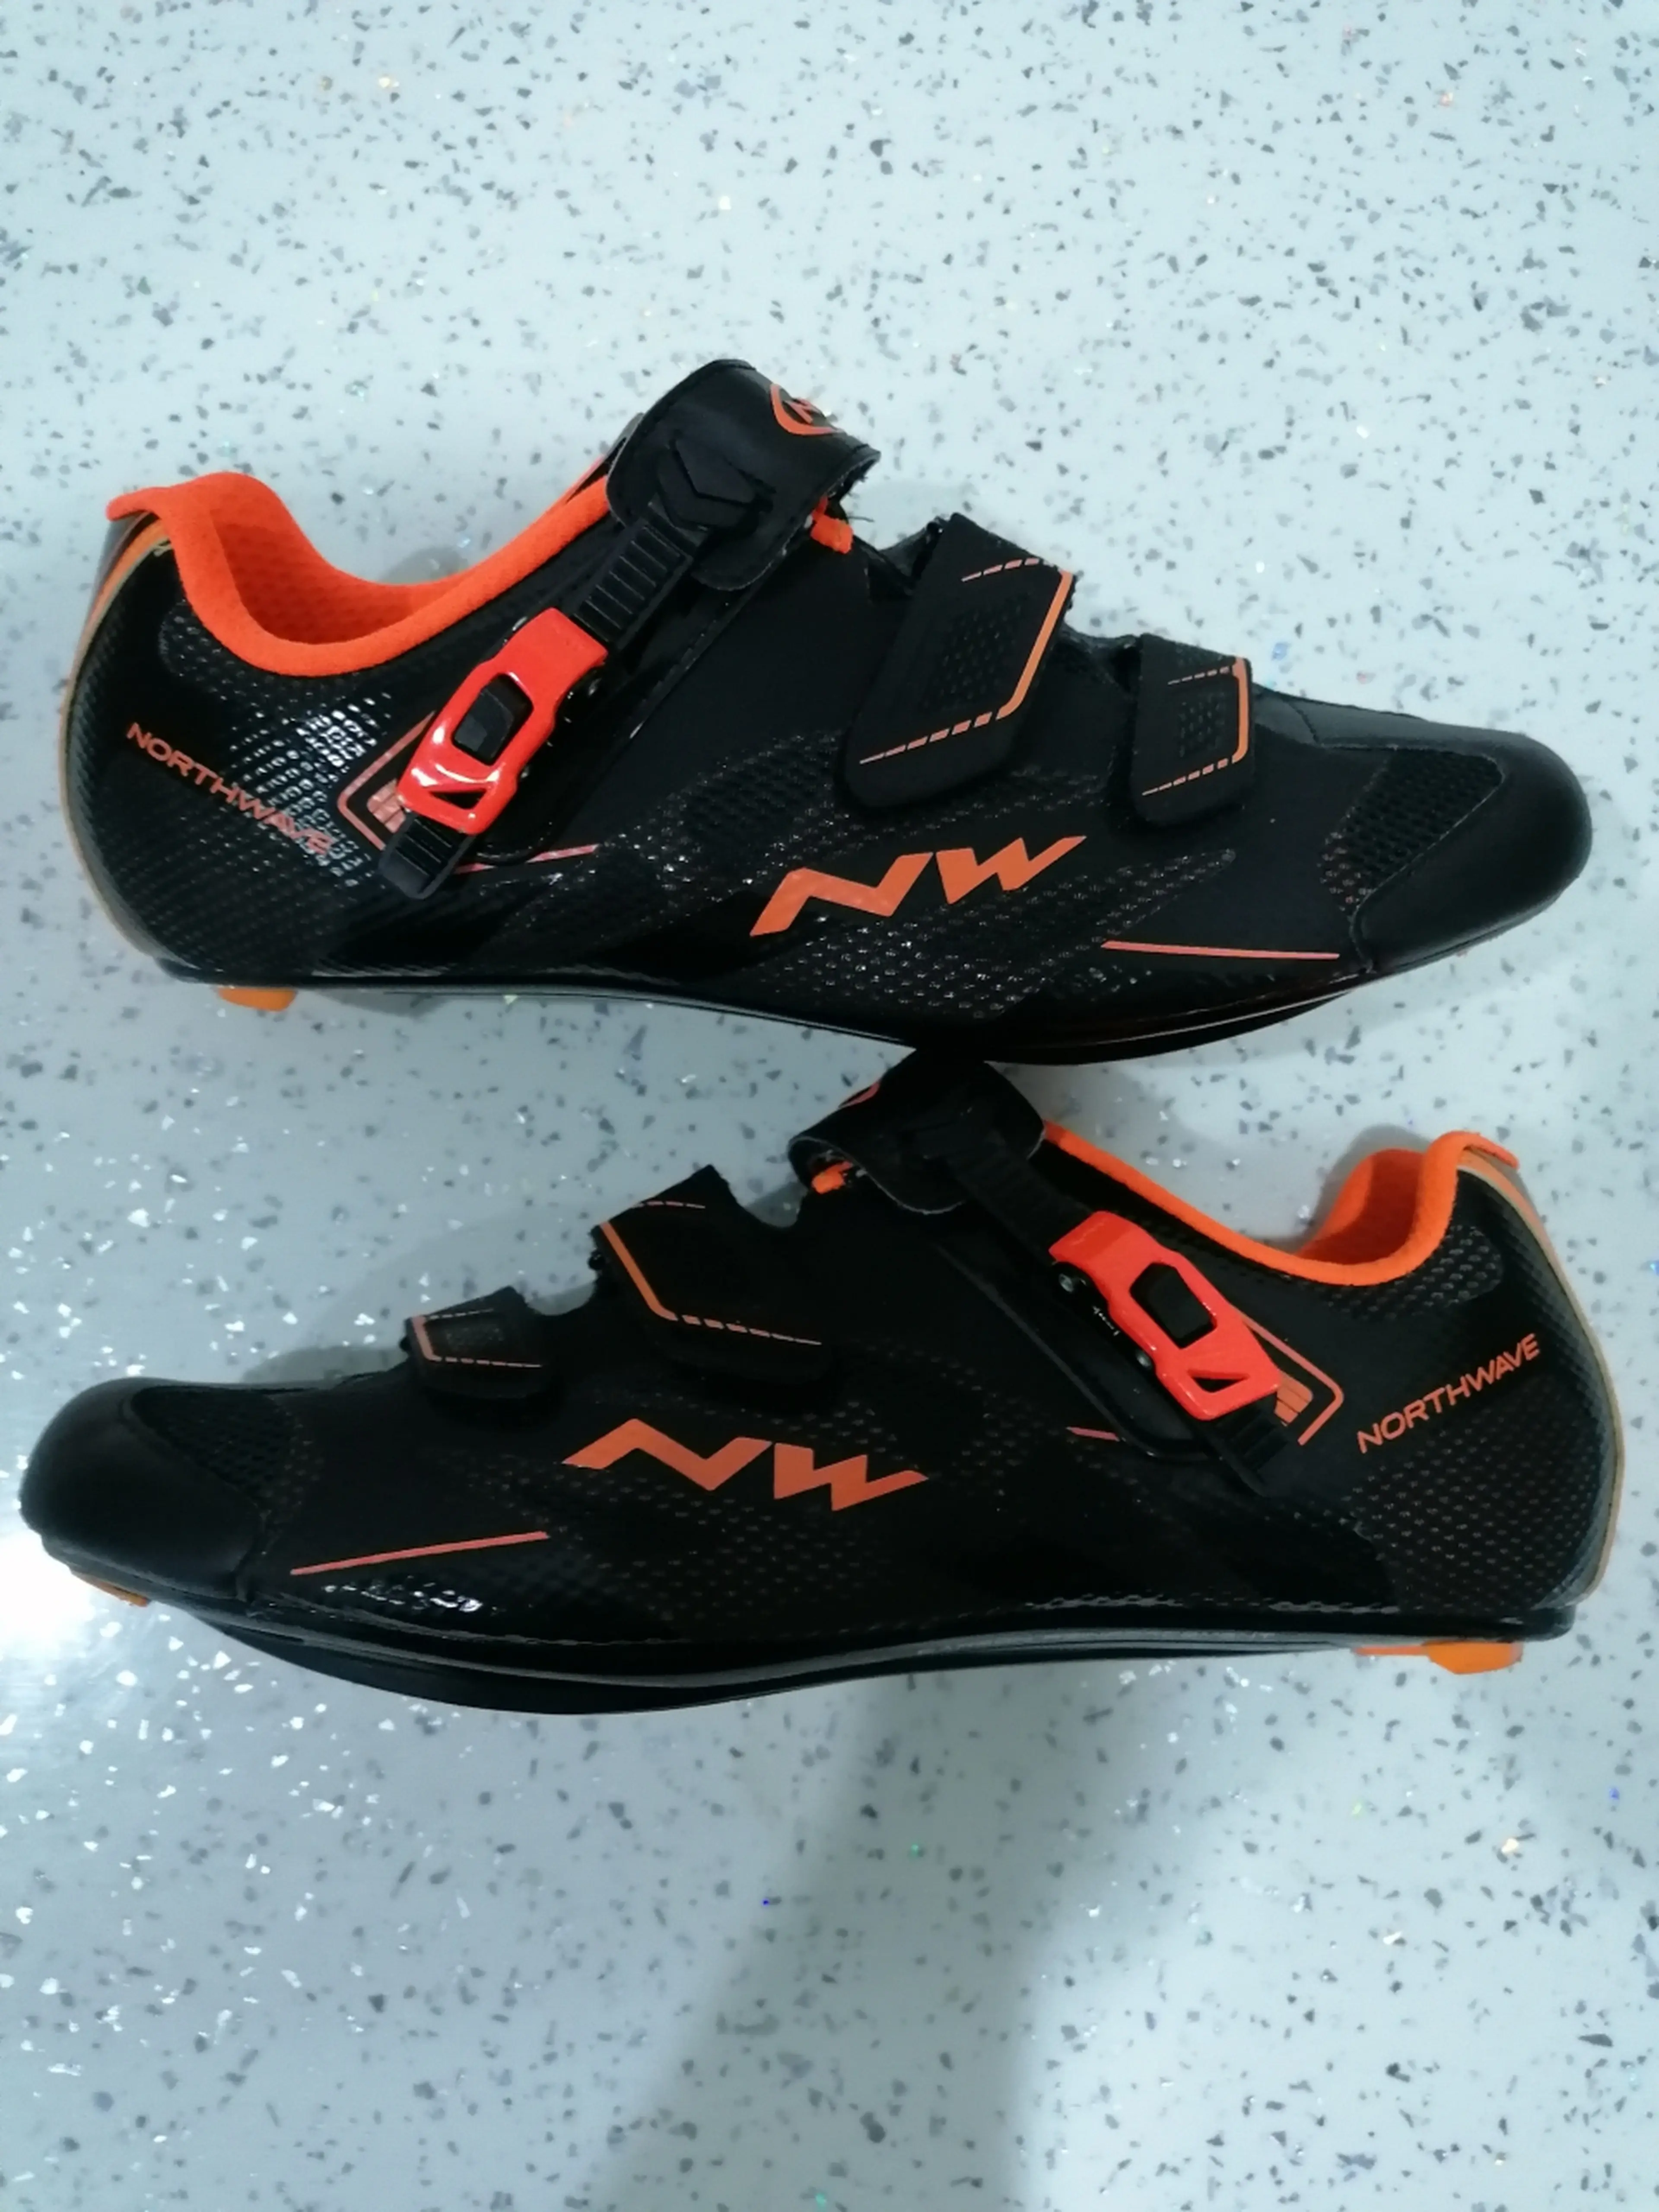 1. Northwave Sonic Srs 2 road size 43